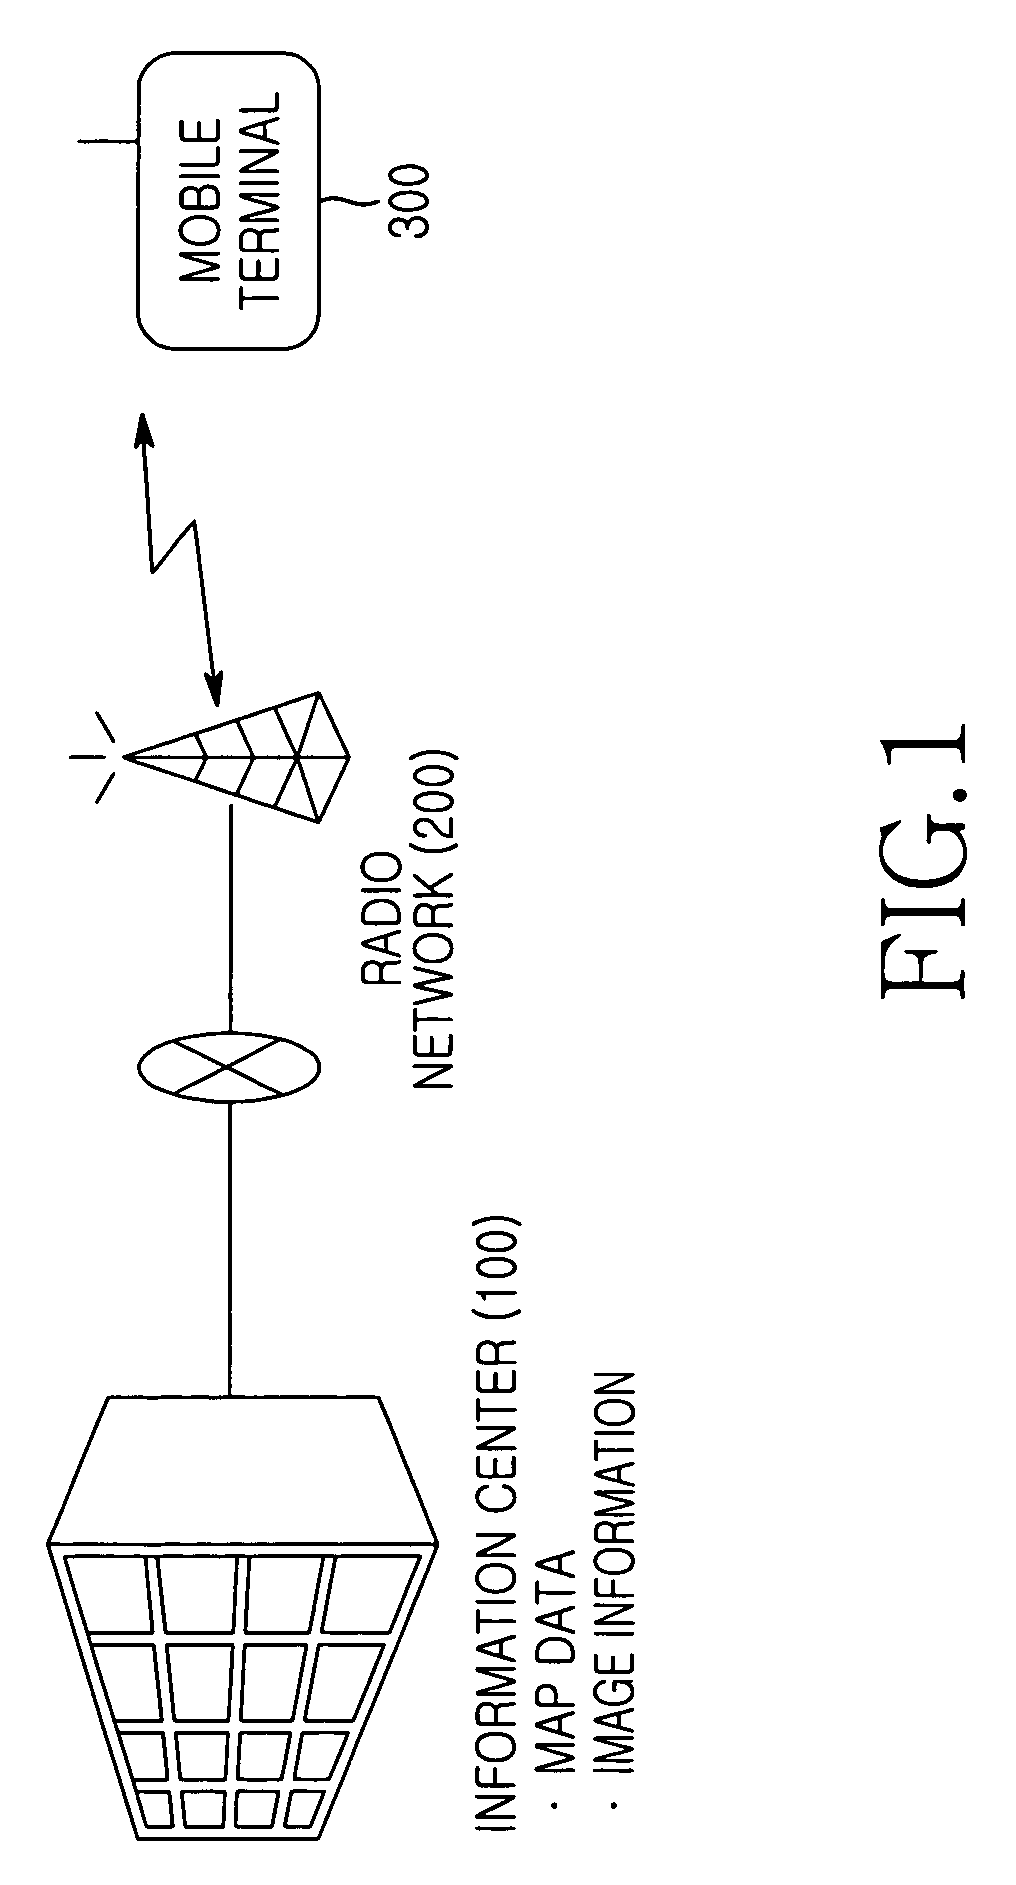 System and method of displaying position information including an image in a navigation system